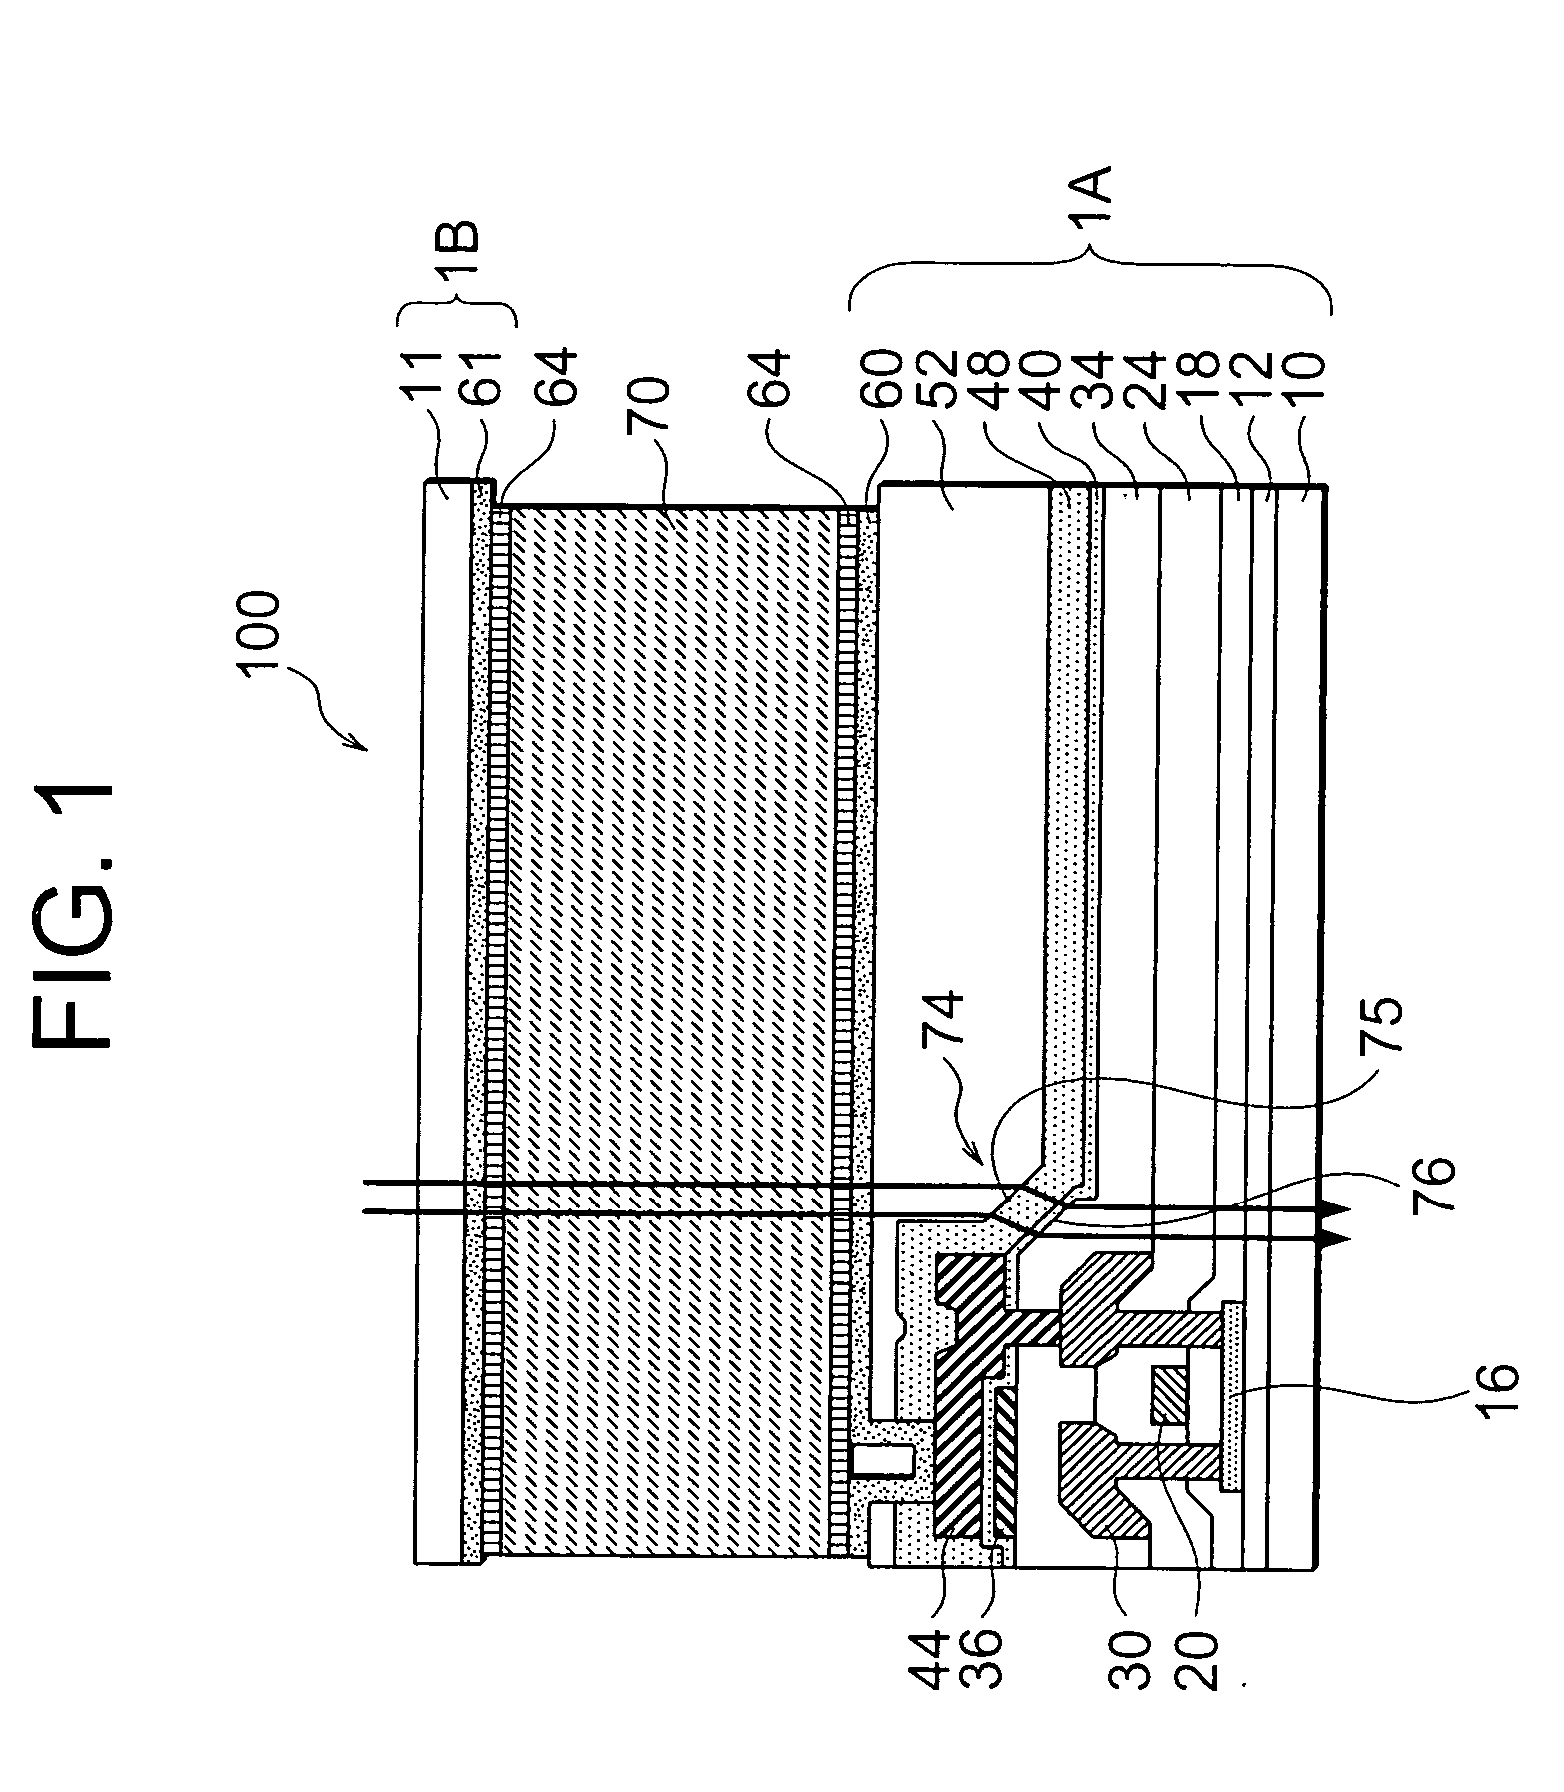 Electro-optical display device and image projection unit